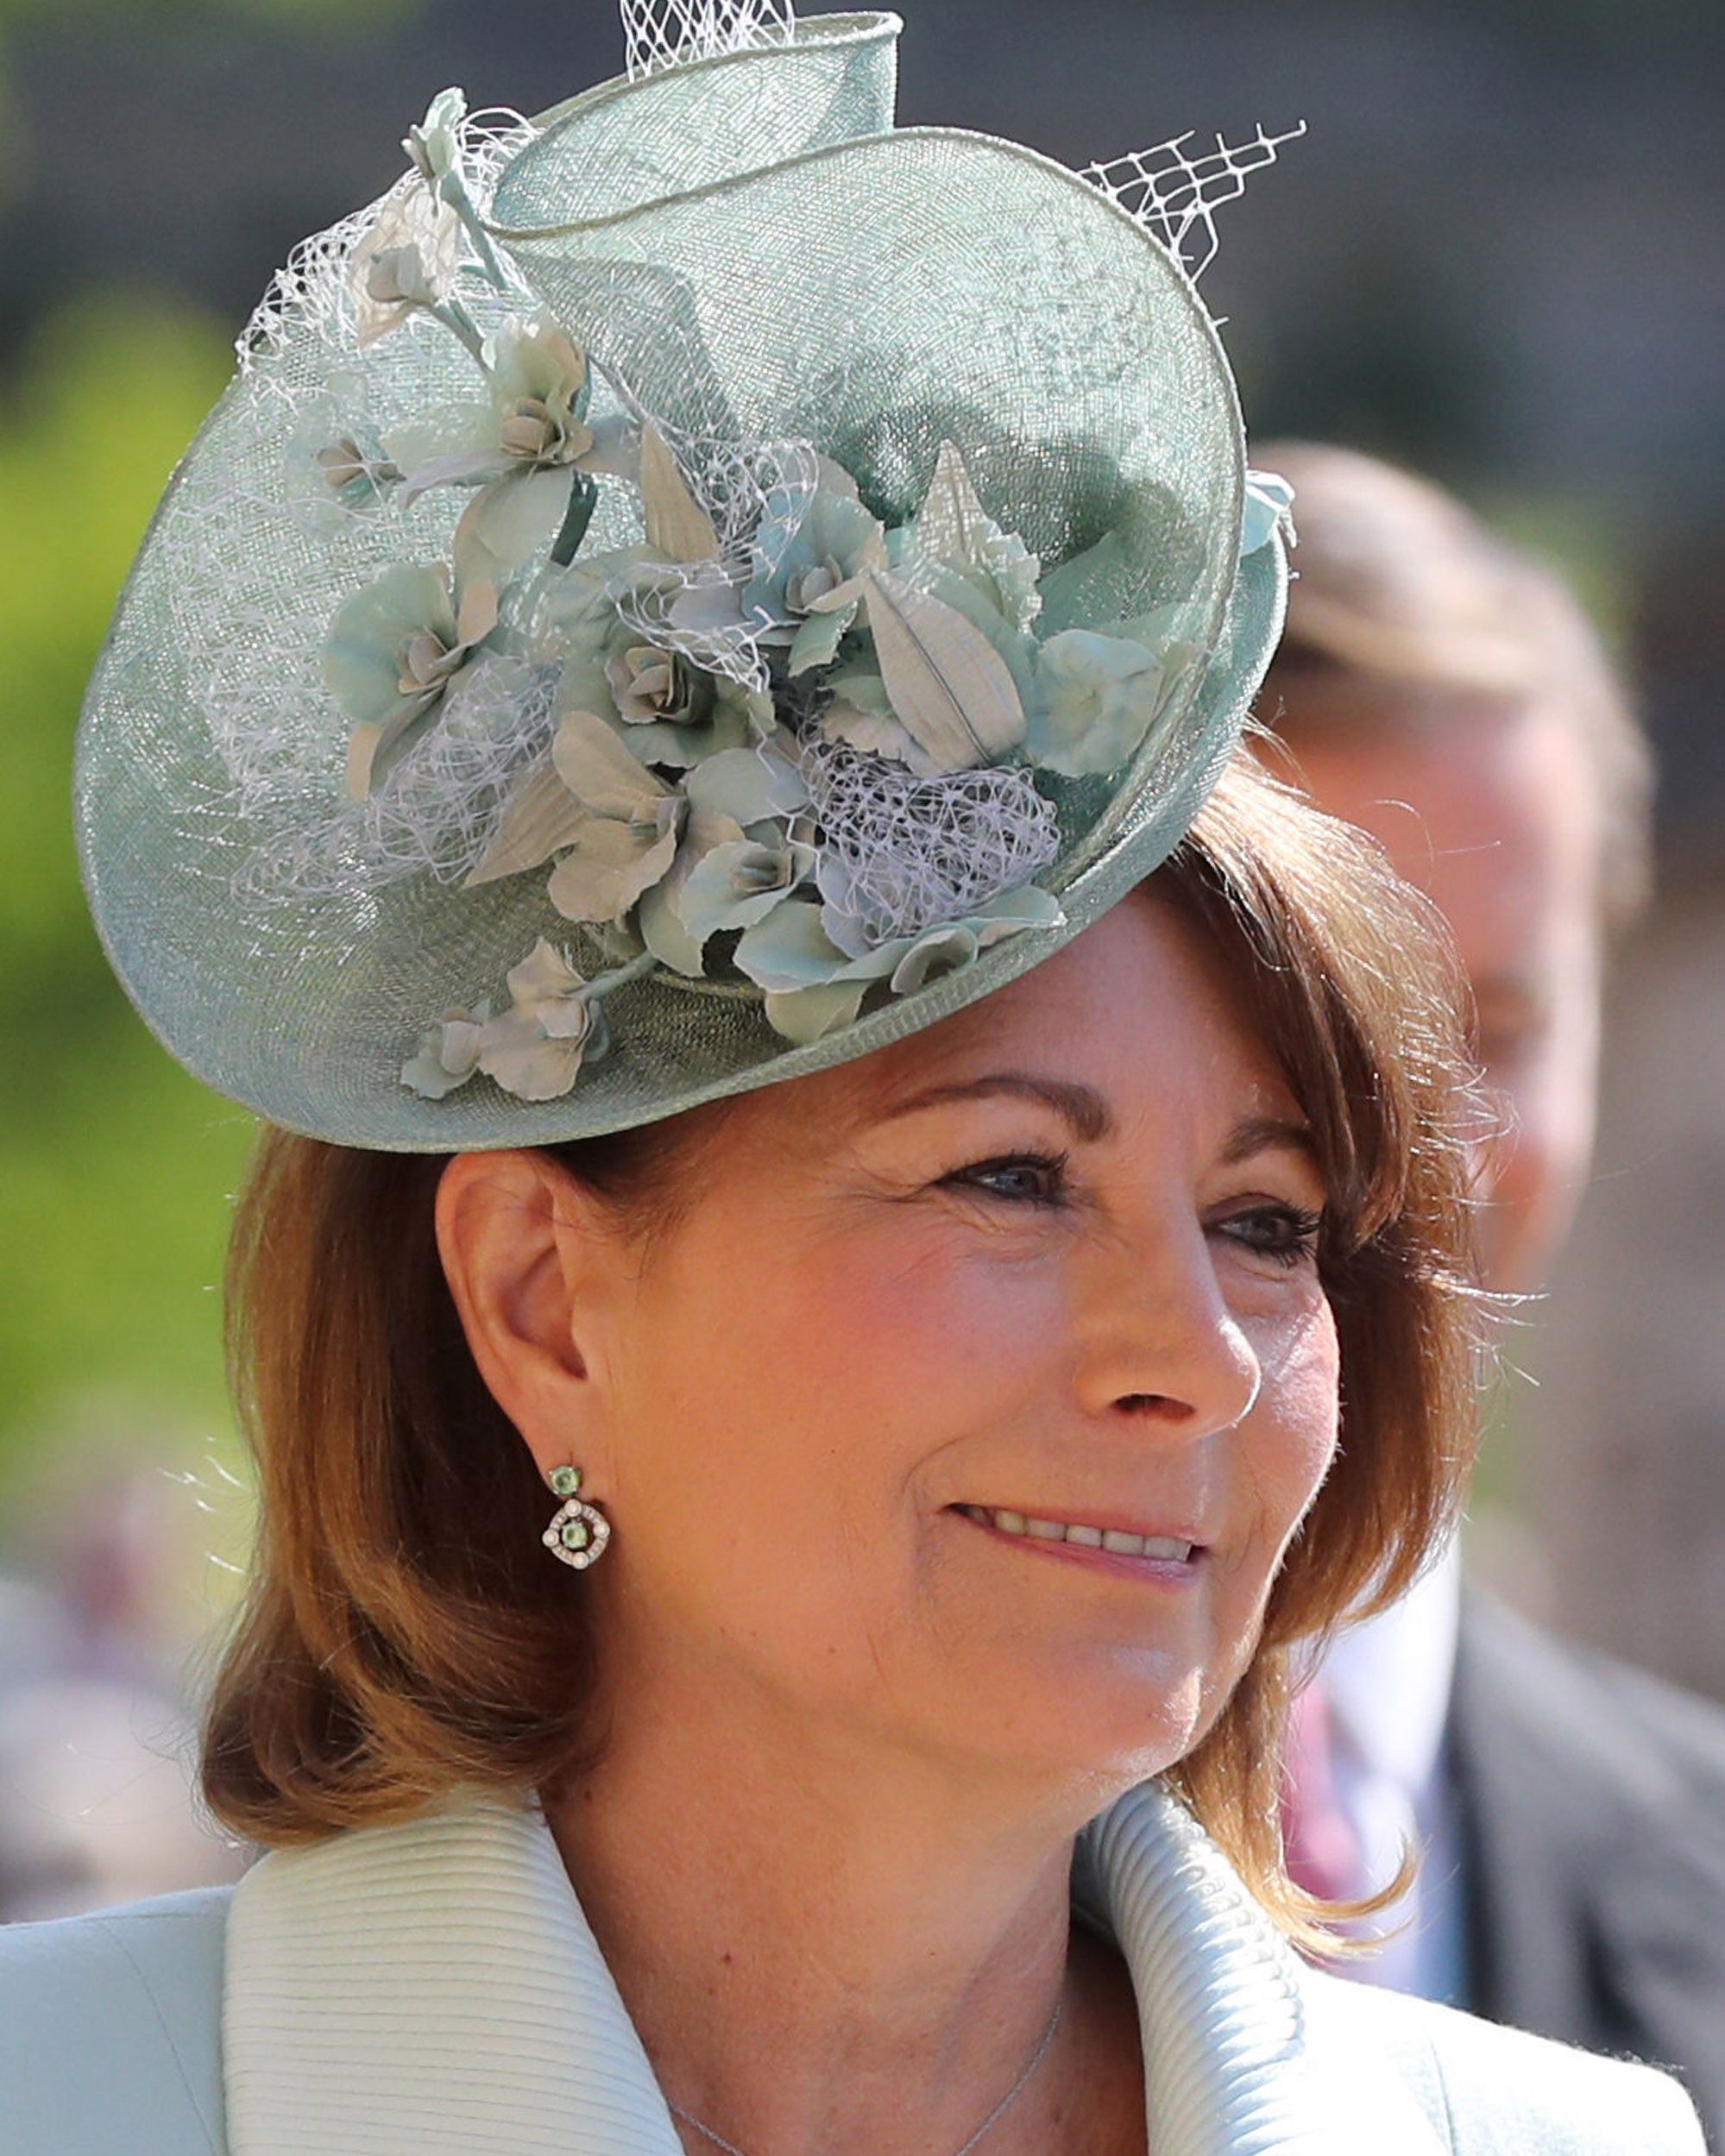 The Best Royal Wedding Hats and Fascinators From Princess Eugenie's Wedding